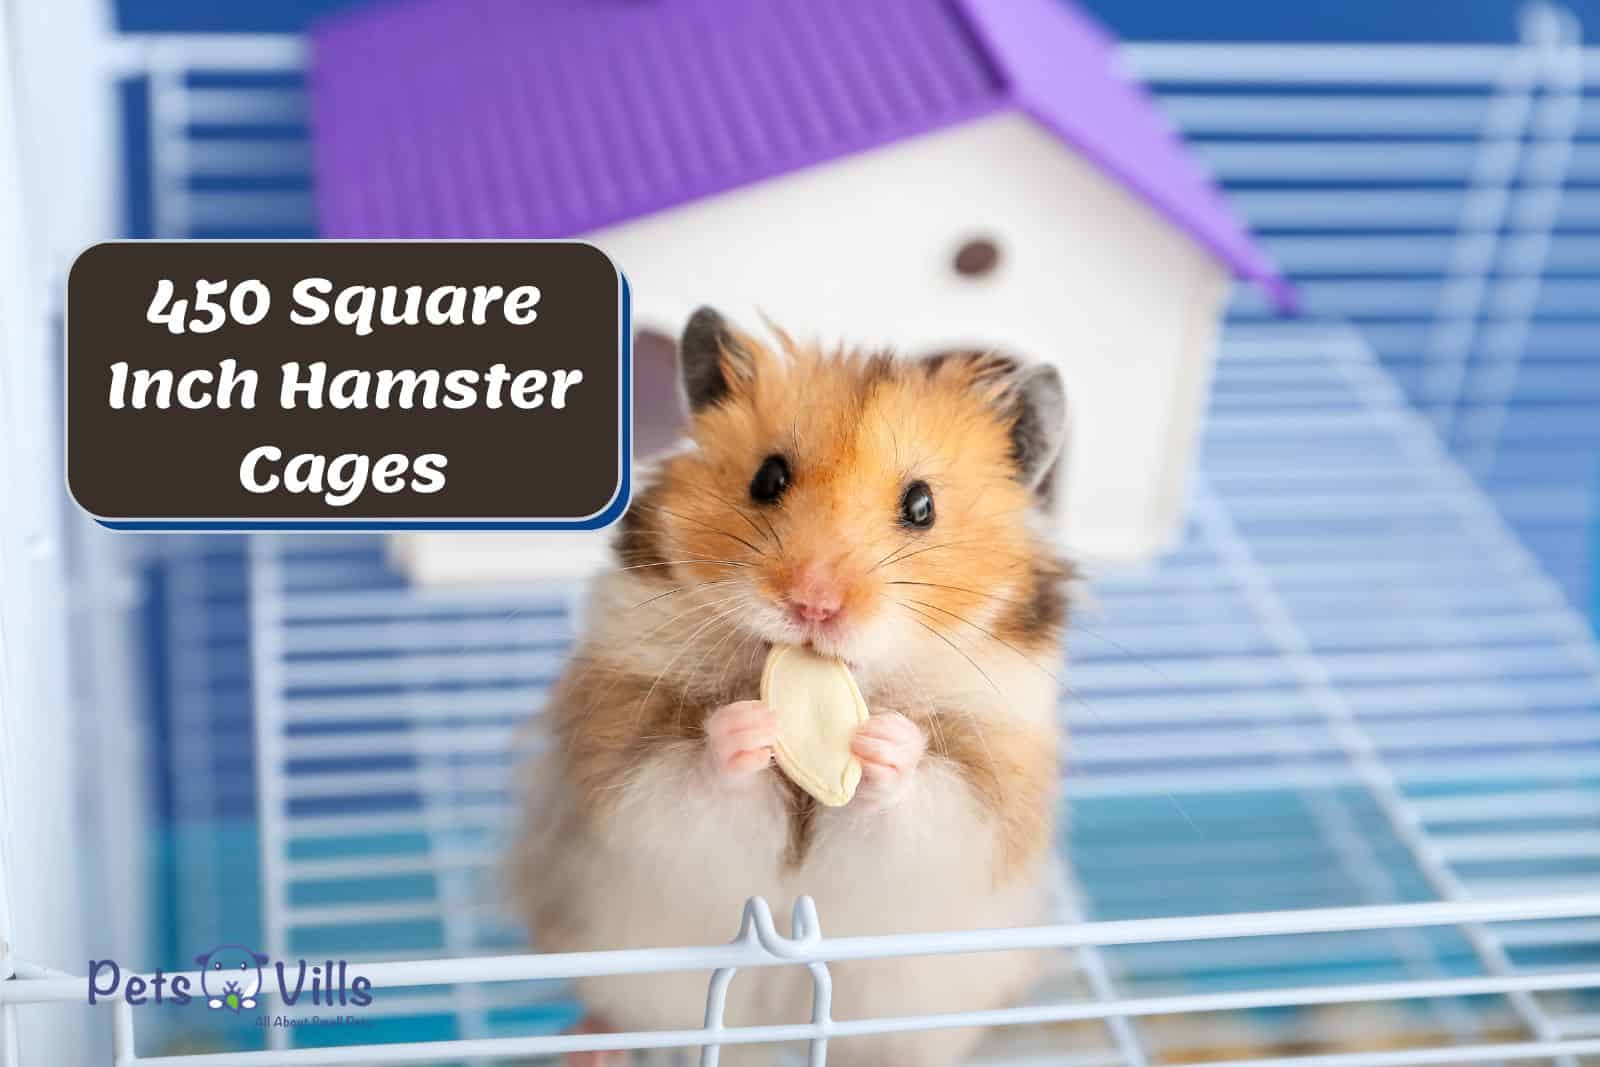 hamster eating a nut outside his 450 square inch hamster cage